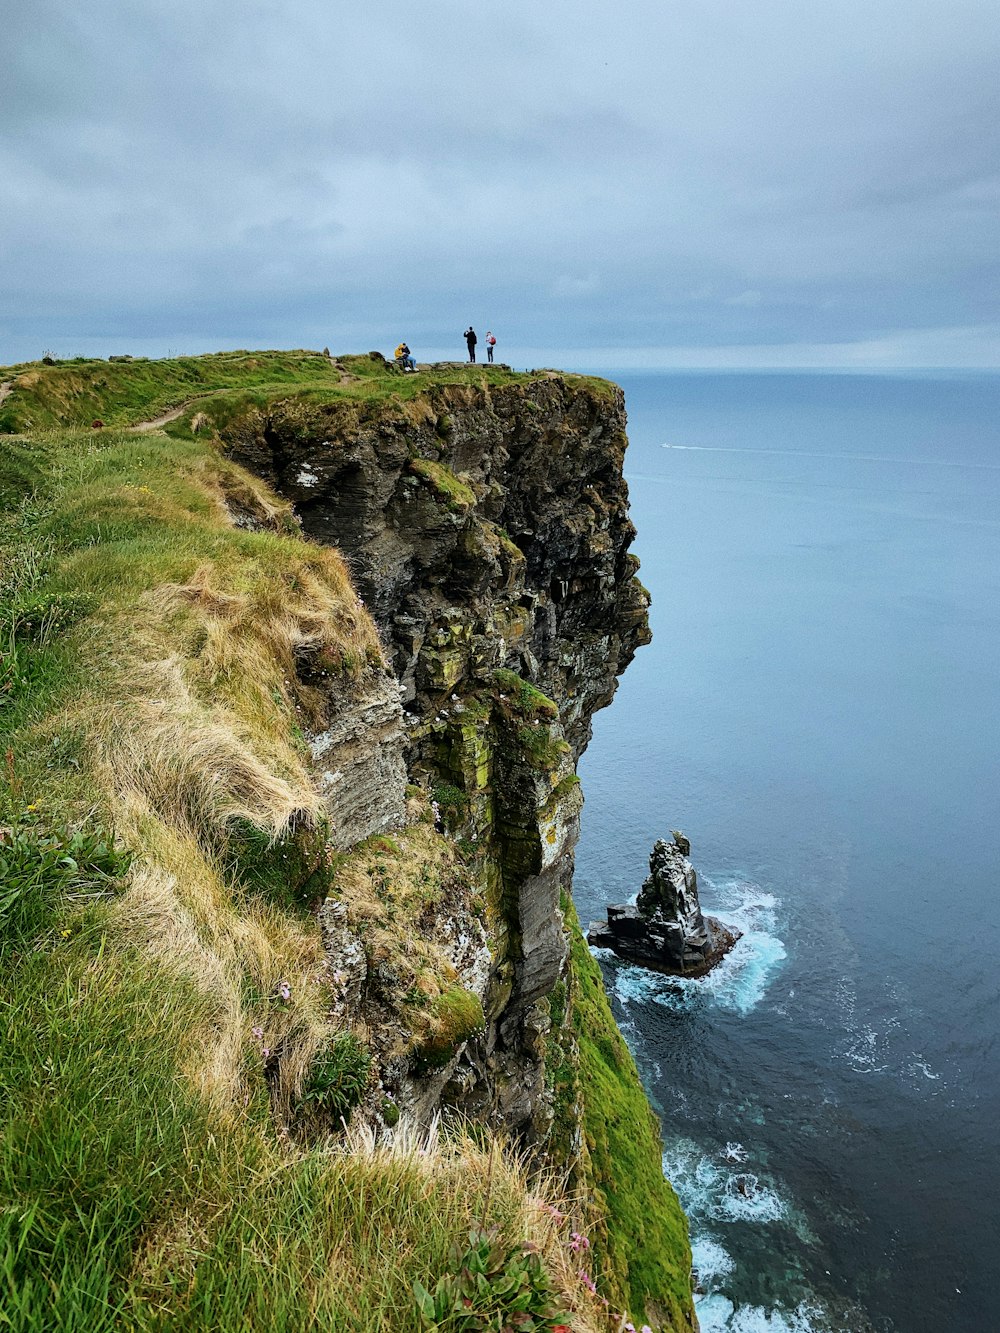 a group of people on a cliff